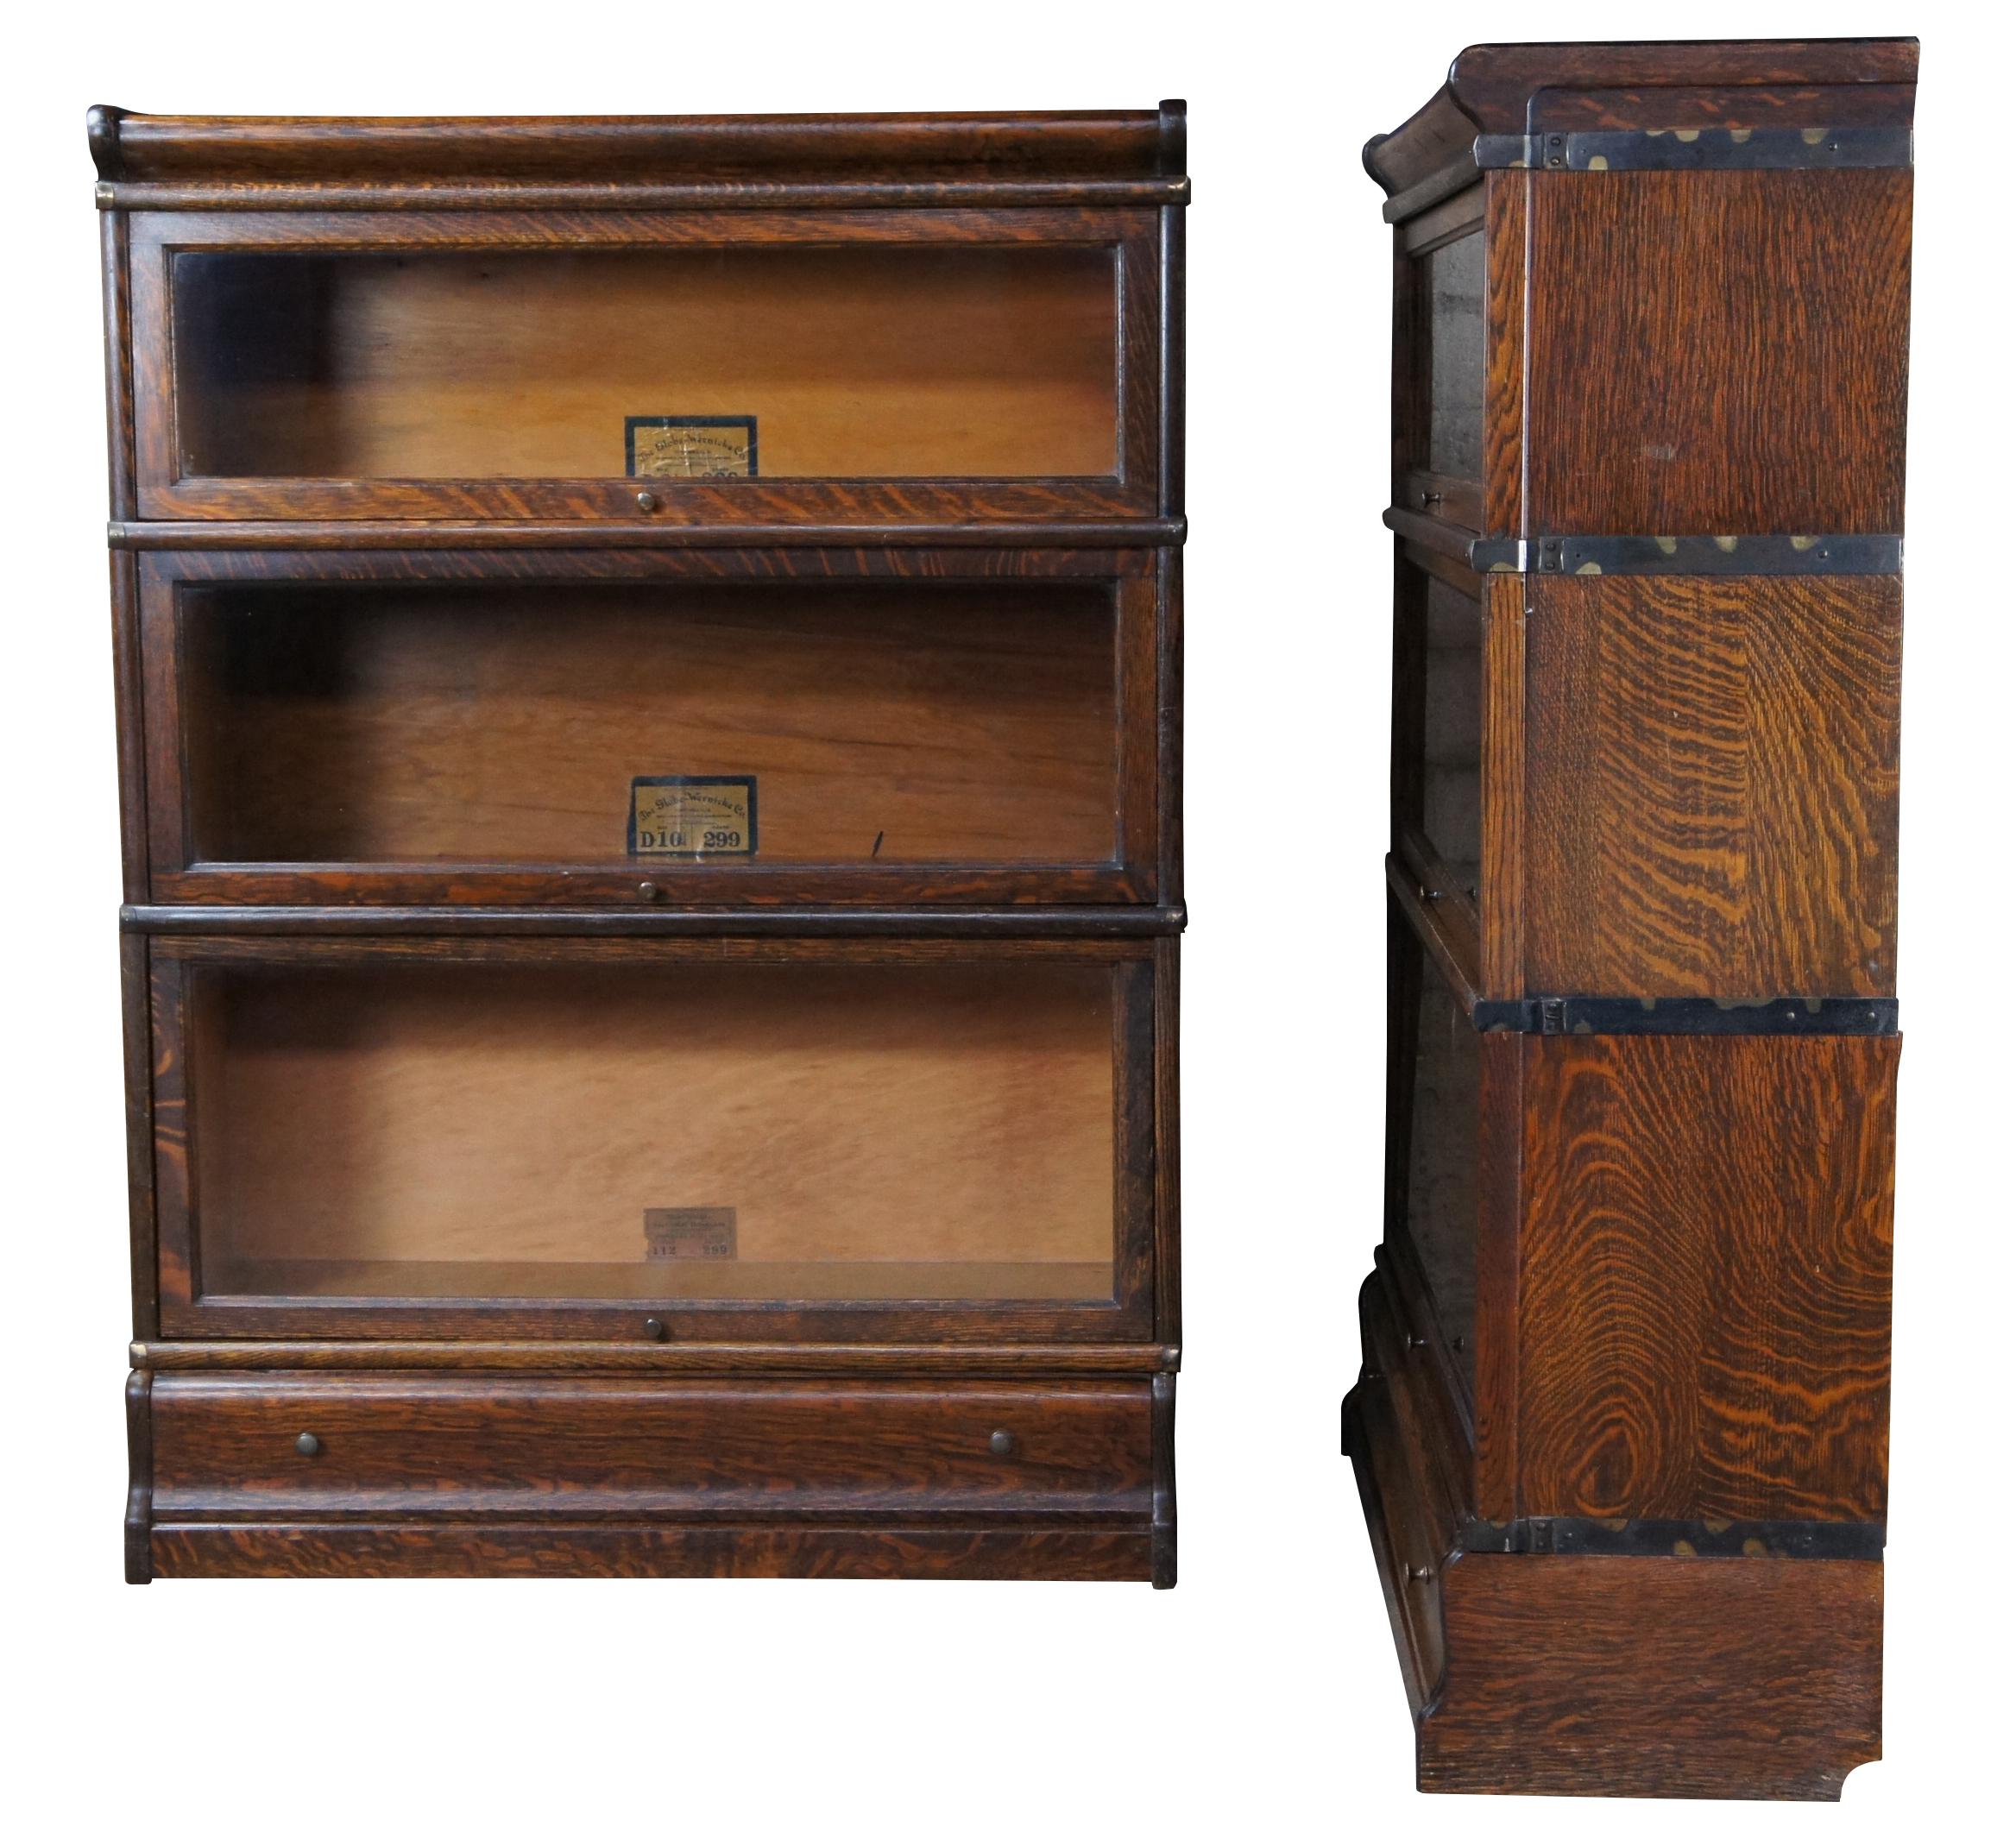 Two antique Globe-Wernicke Mission oak stacking library / lawyer curio bookcases or barrister cabinets. Made in Cincinnati Ohio. Features stackable units of 8.5